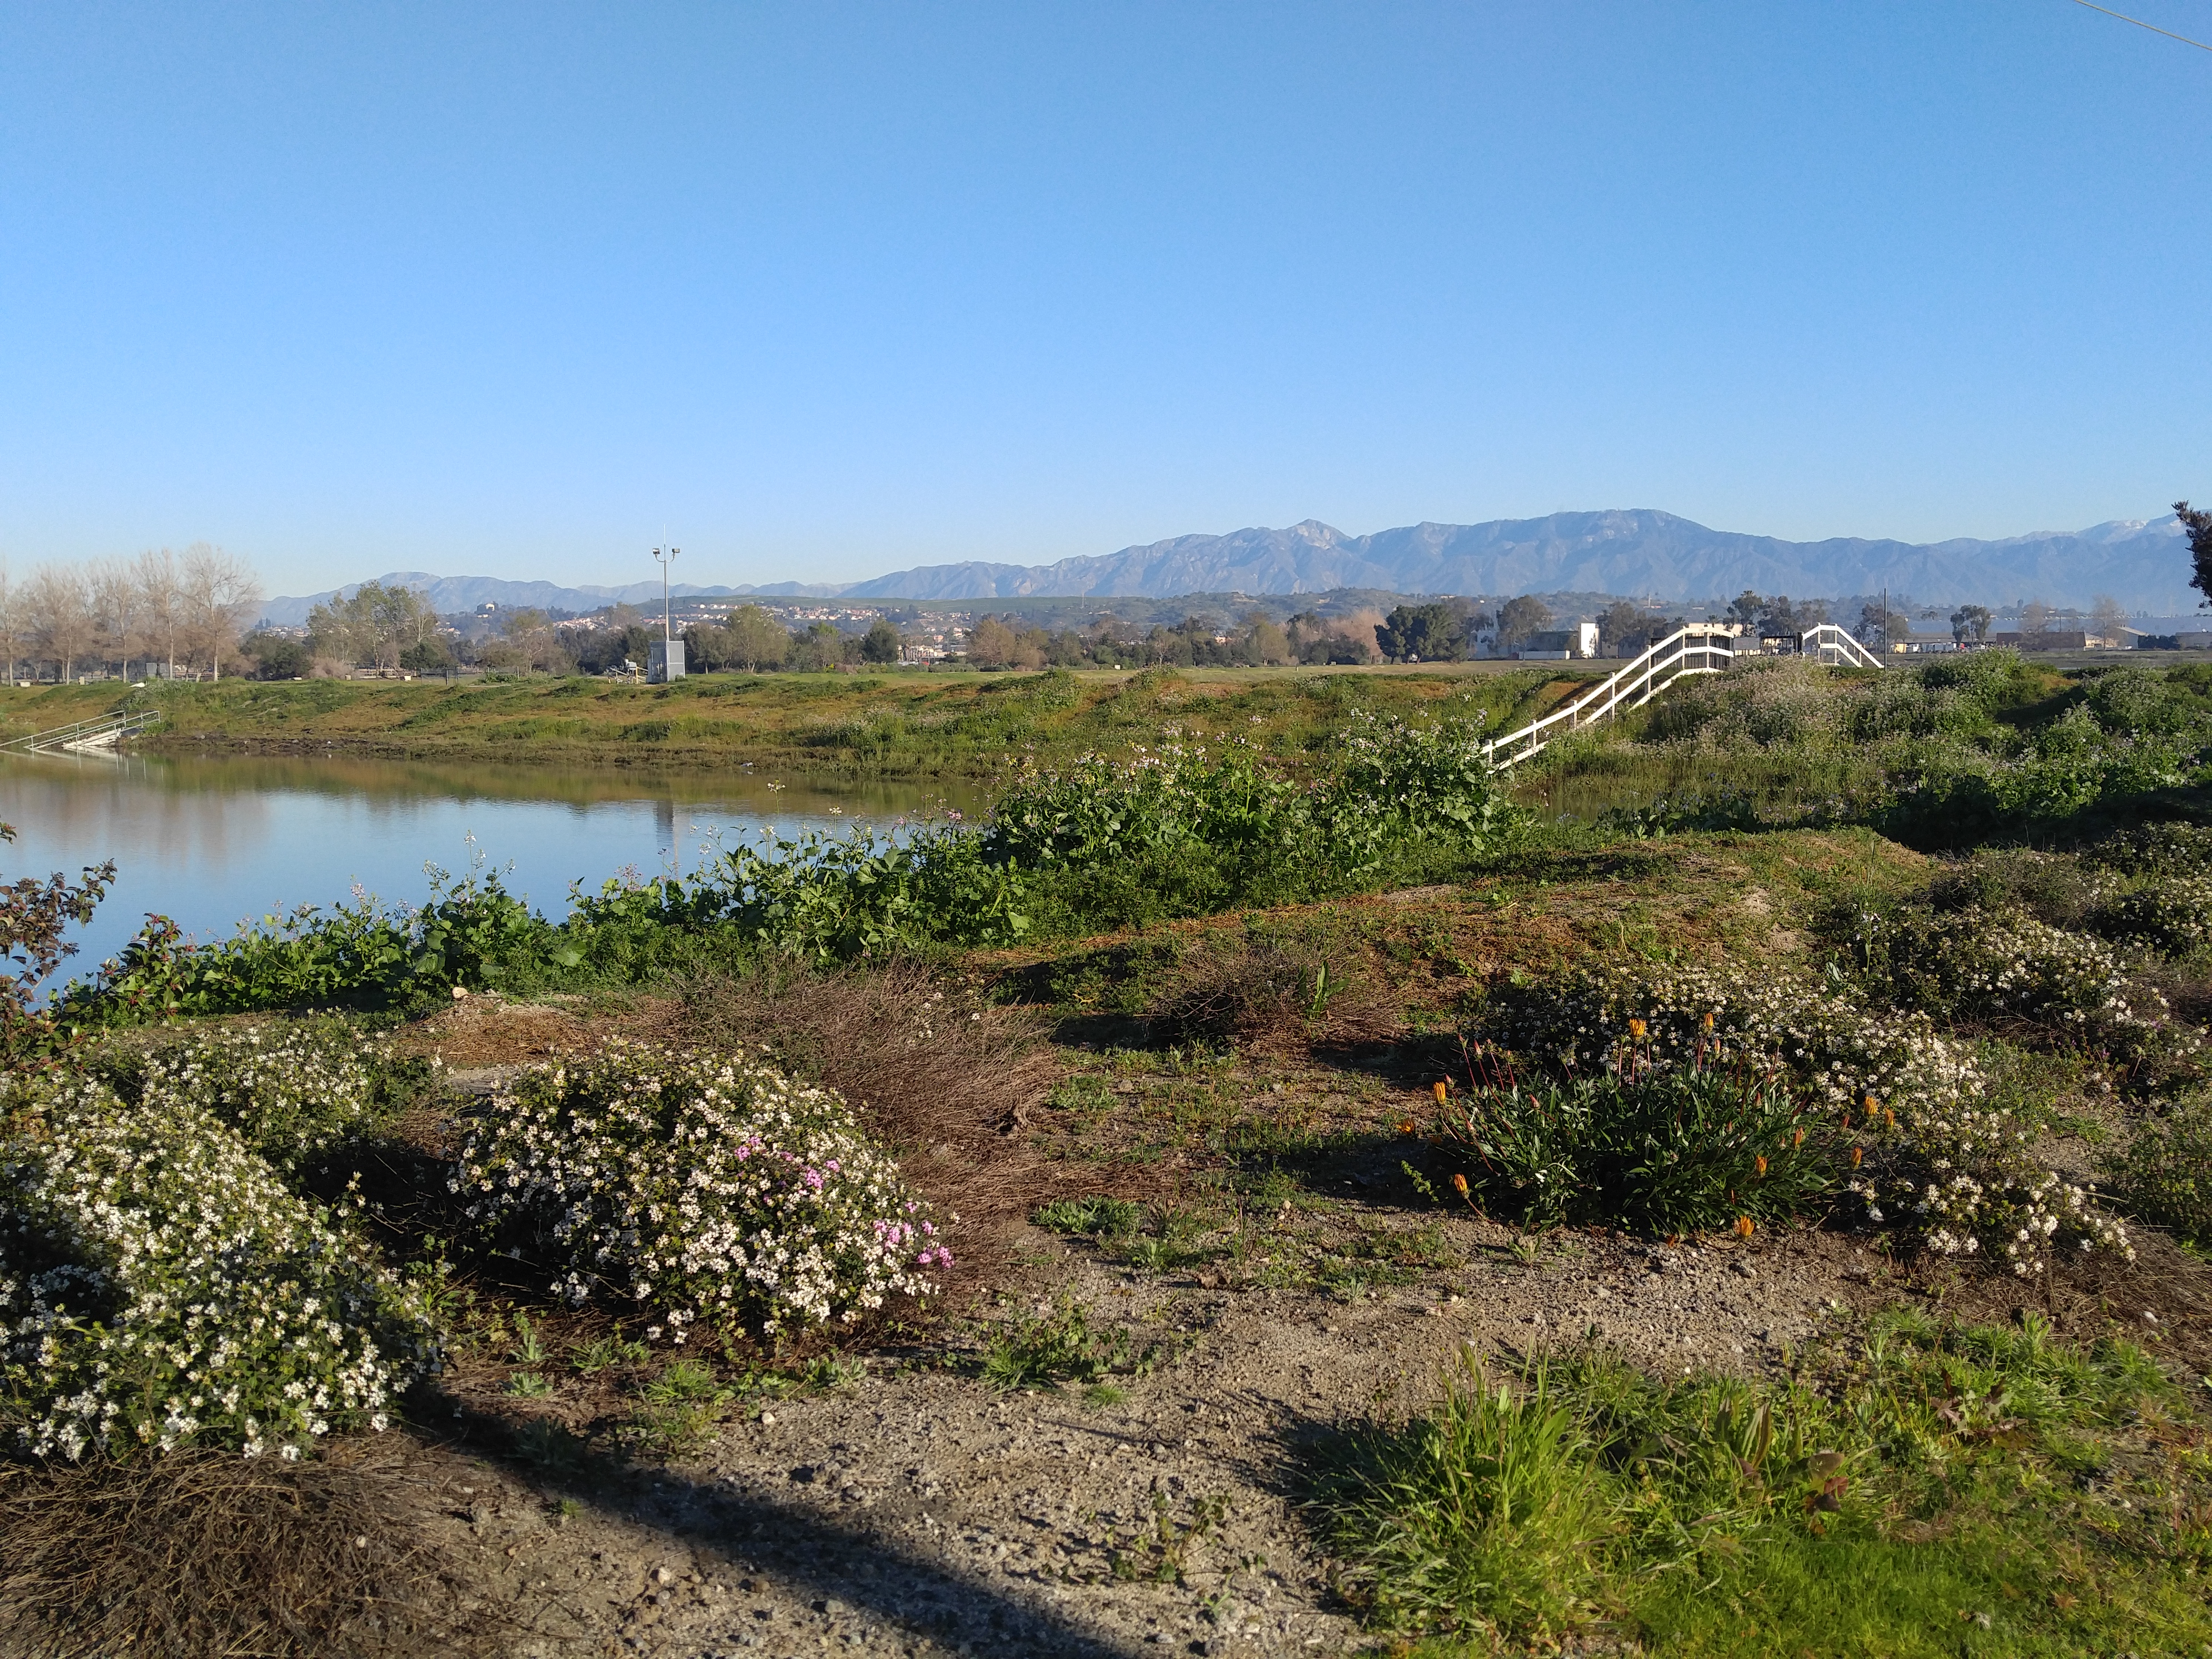 Wild flowers grow on the spreading ground banks. A deep pool of calm water in the basin reflects the blue sky. The San Gabriel mountains are visible to the north in the background.